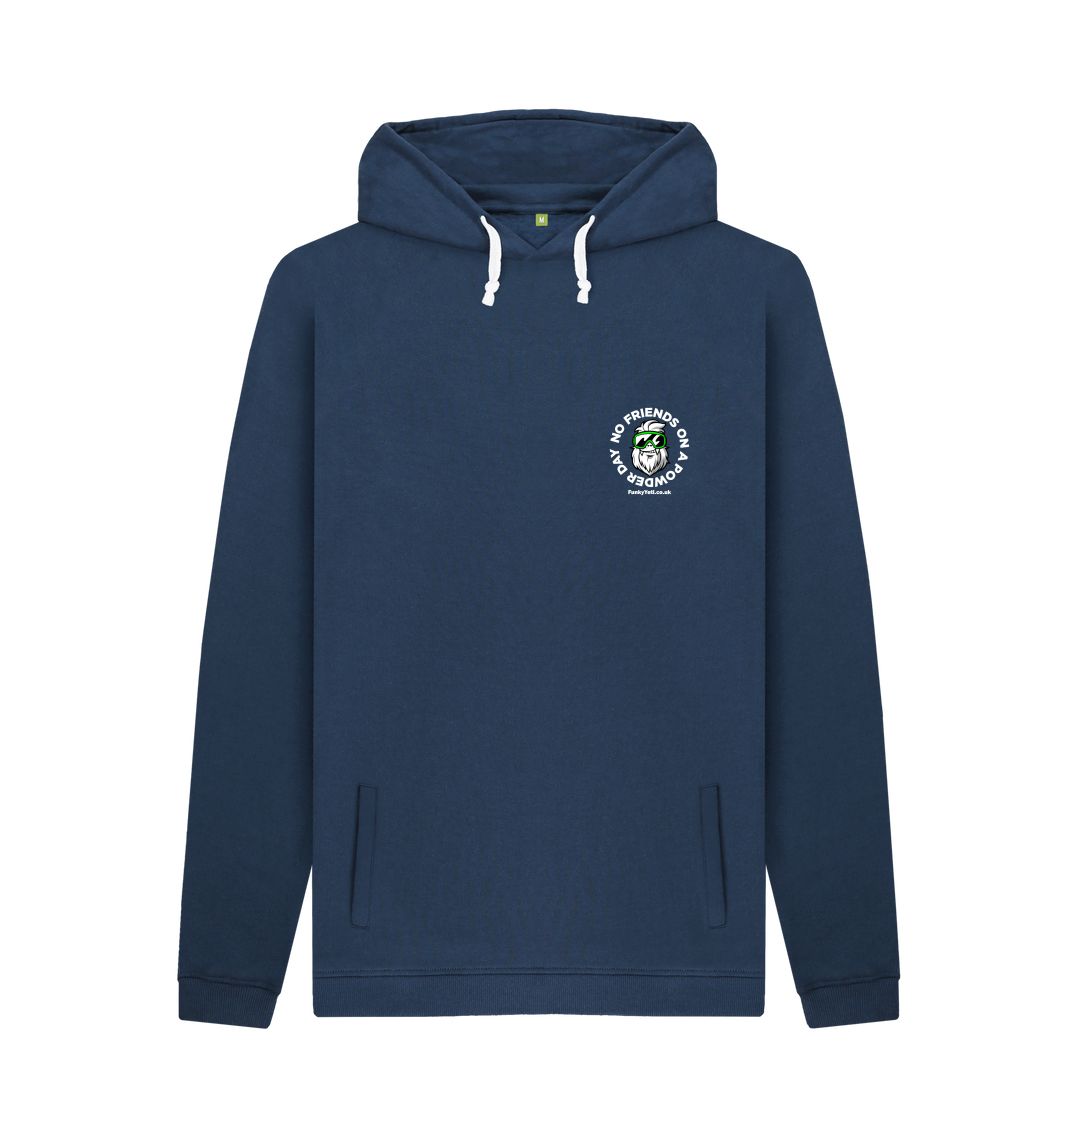 Navy Funky Yeti Men's Pullover Hoodie - No Friends On A Powder Day